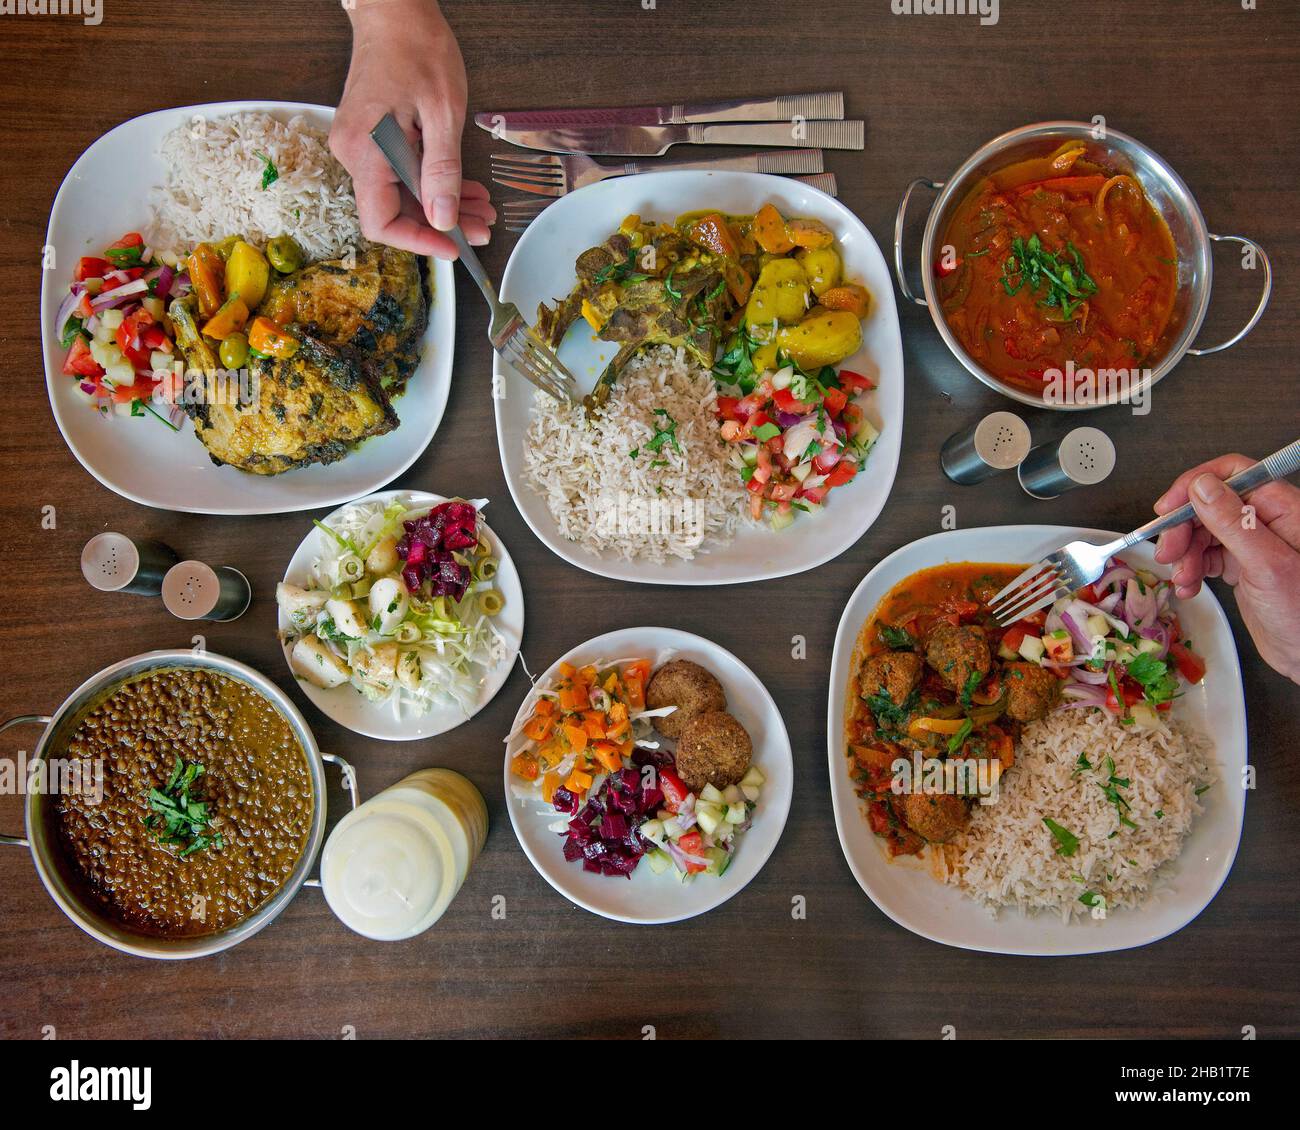 Selection of Moroccan food. Stock Photo